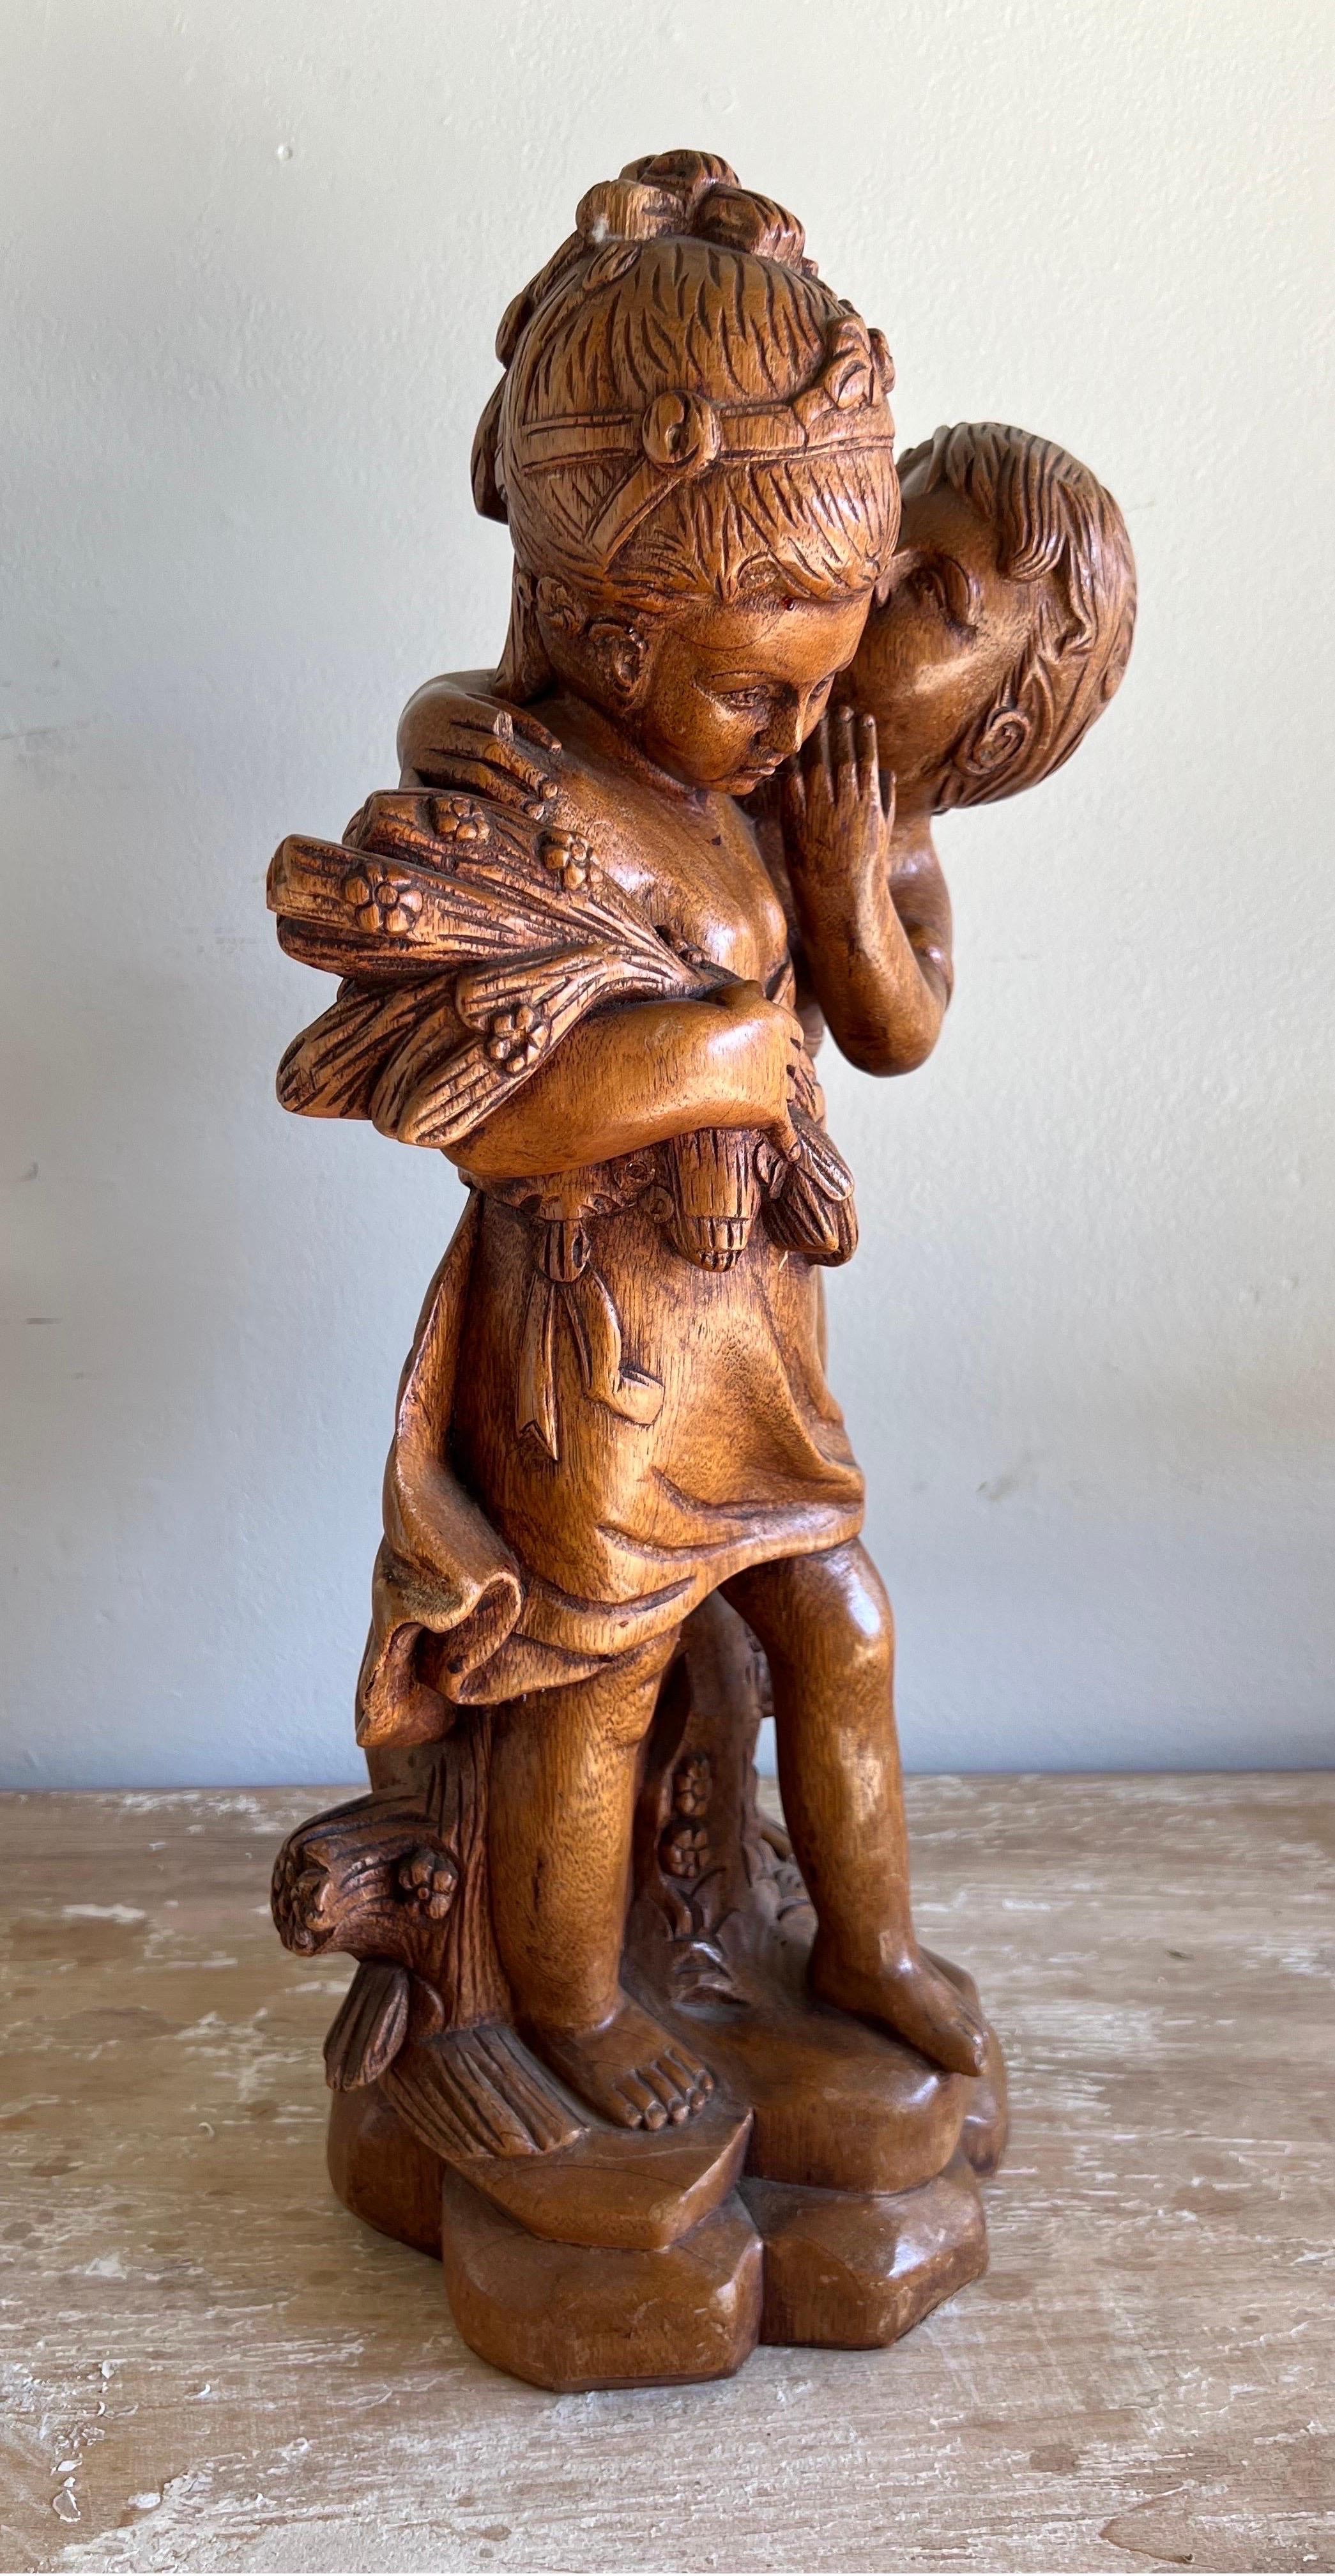 The wood figurative carving of a boy whispering in a girl's ear, with the girl holding a bouquet of flowers in her hand, made from walnut, likely captures a moment of innocence and romance.  The use of walnut adds warmth and a timeless quality to